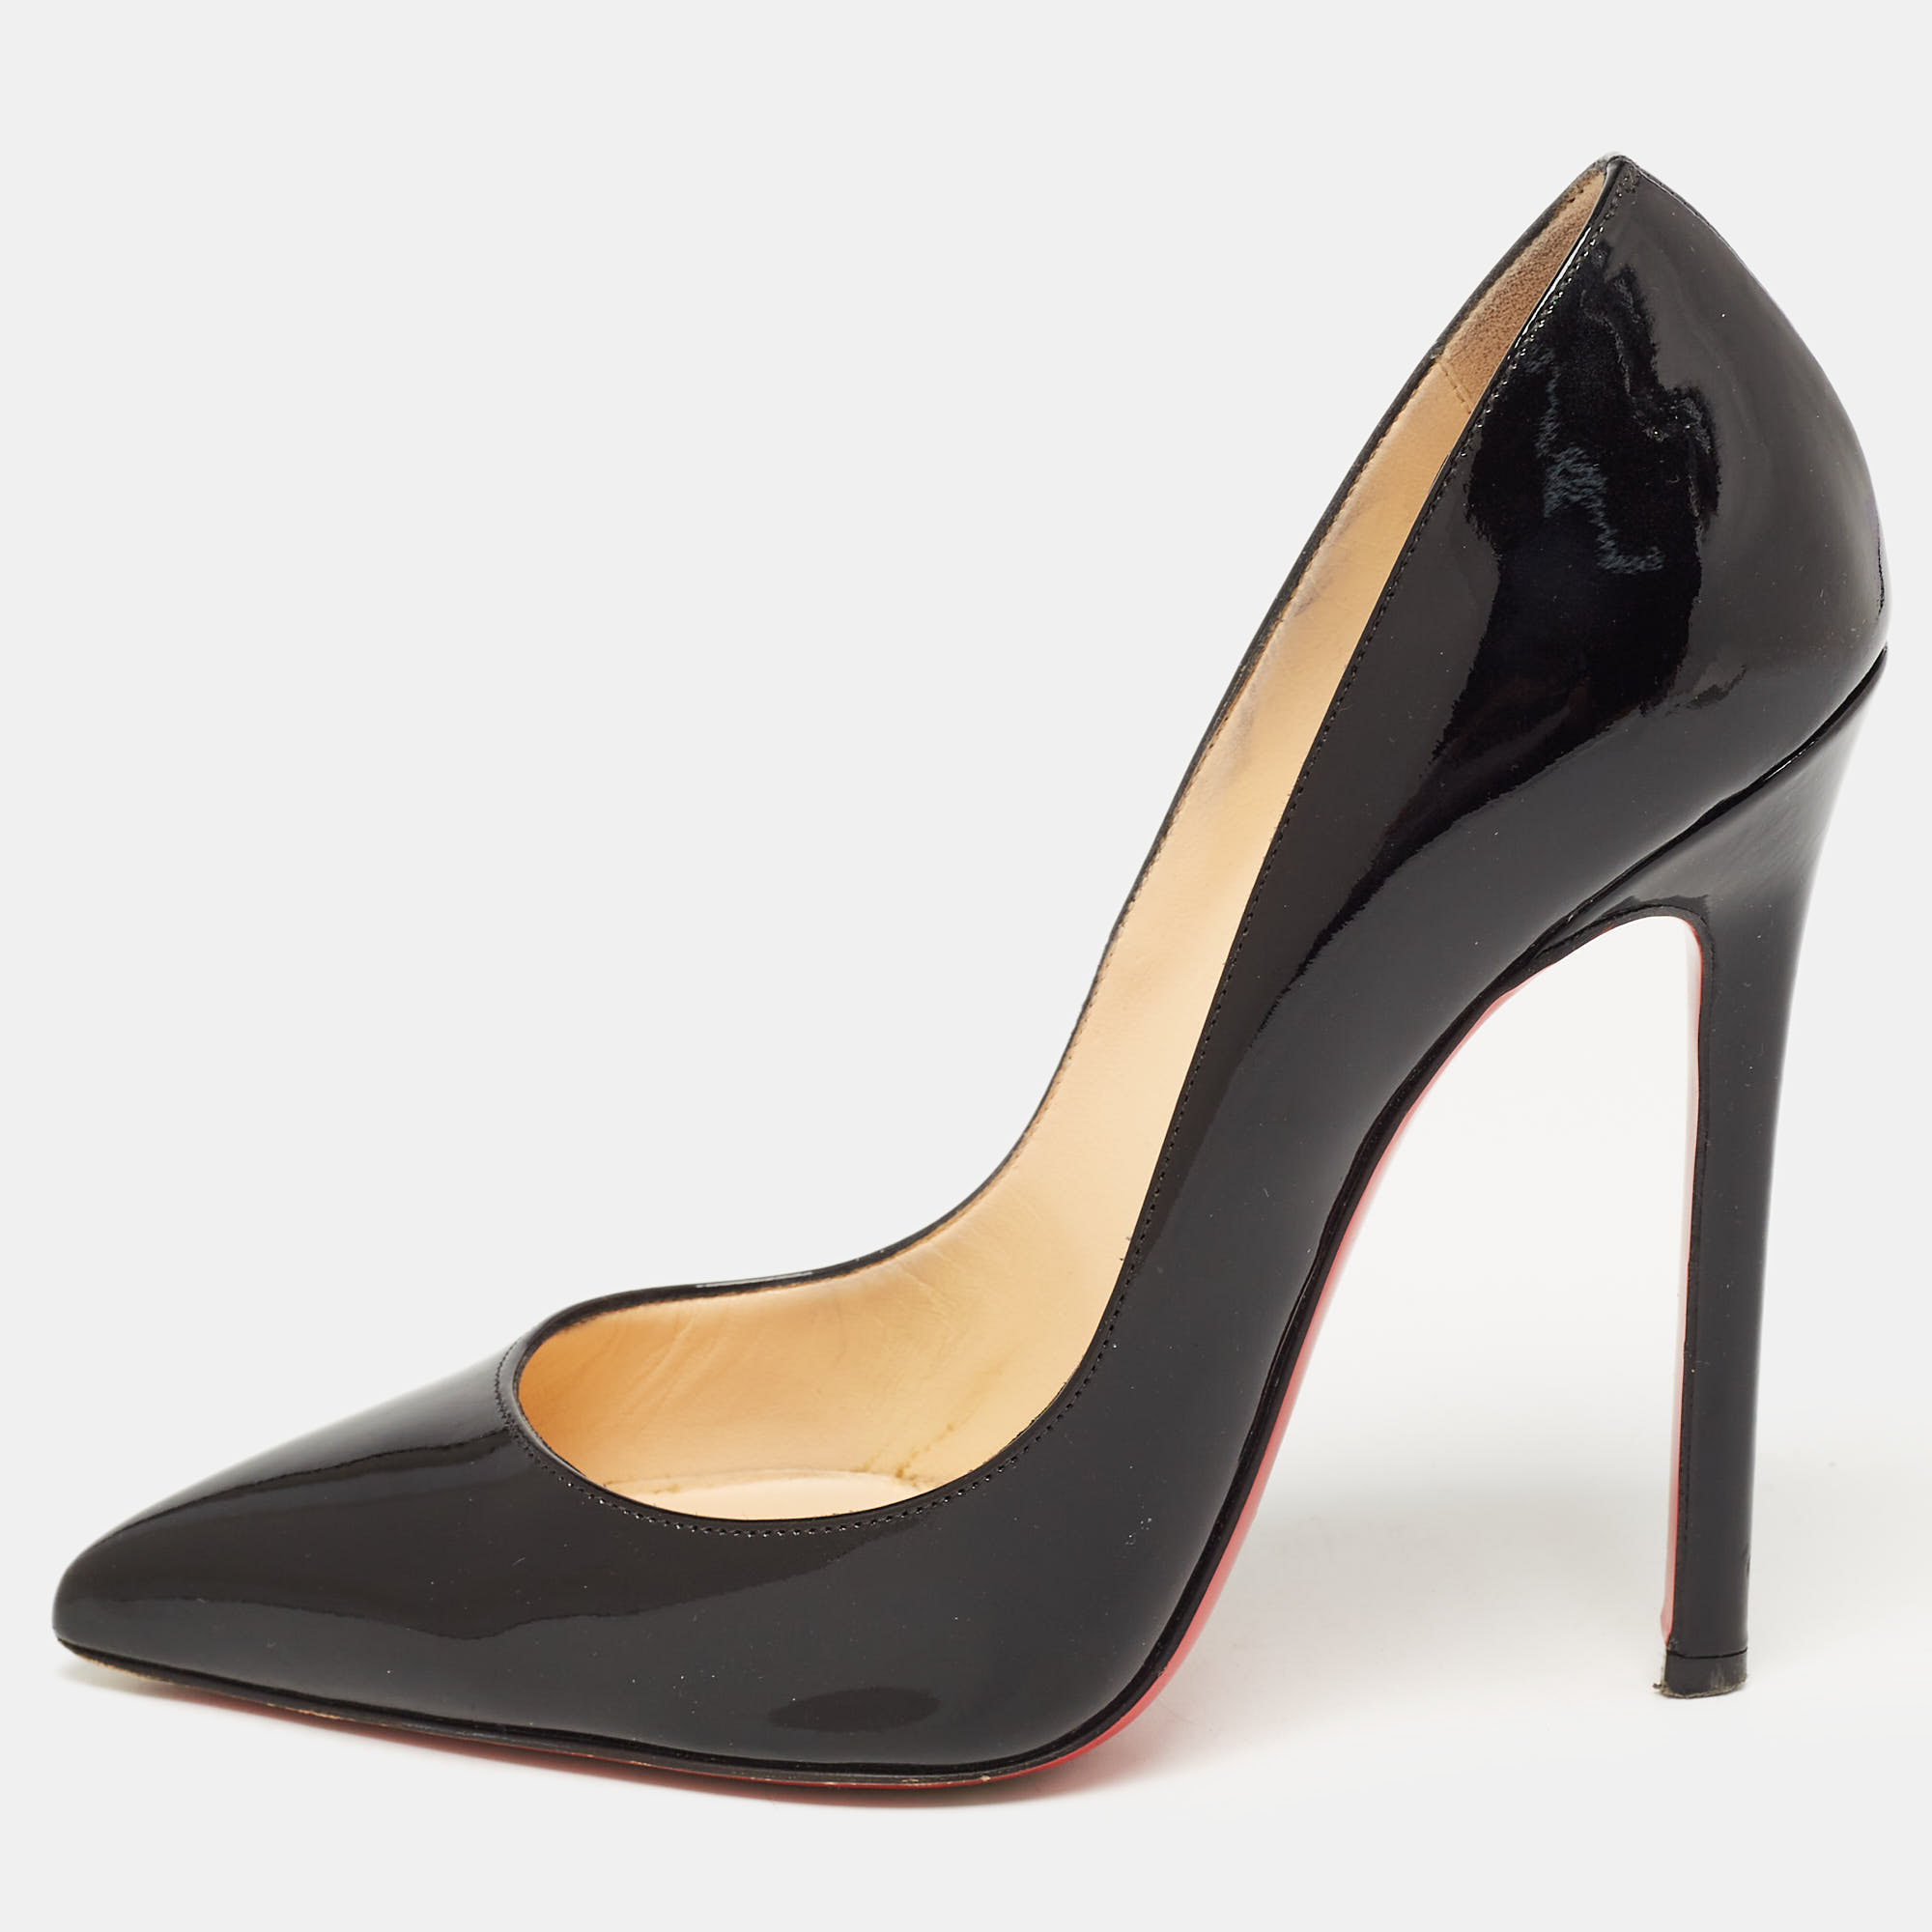 Christian Louboutin Black Patent Leather Pigalle Pumps Size 38